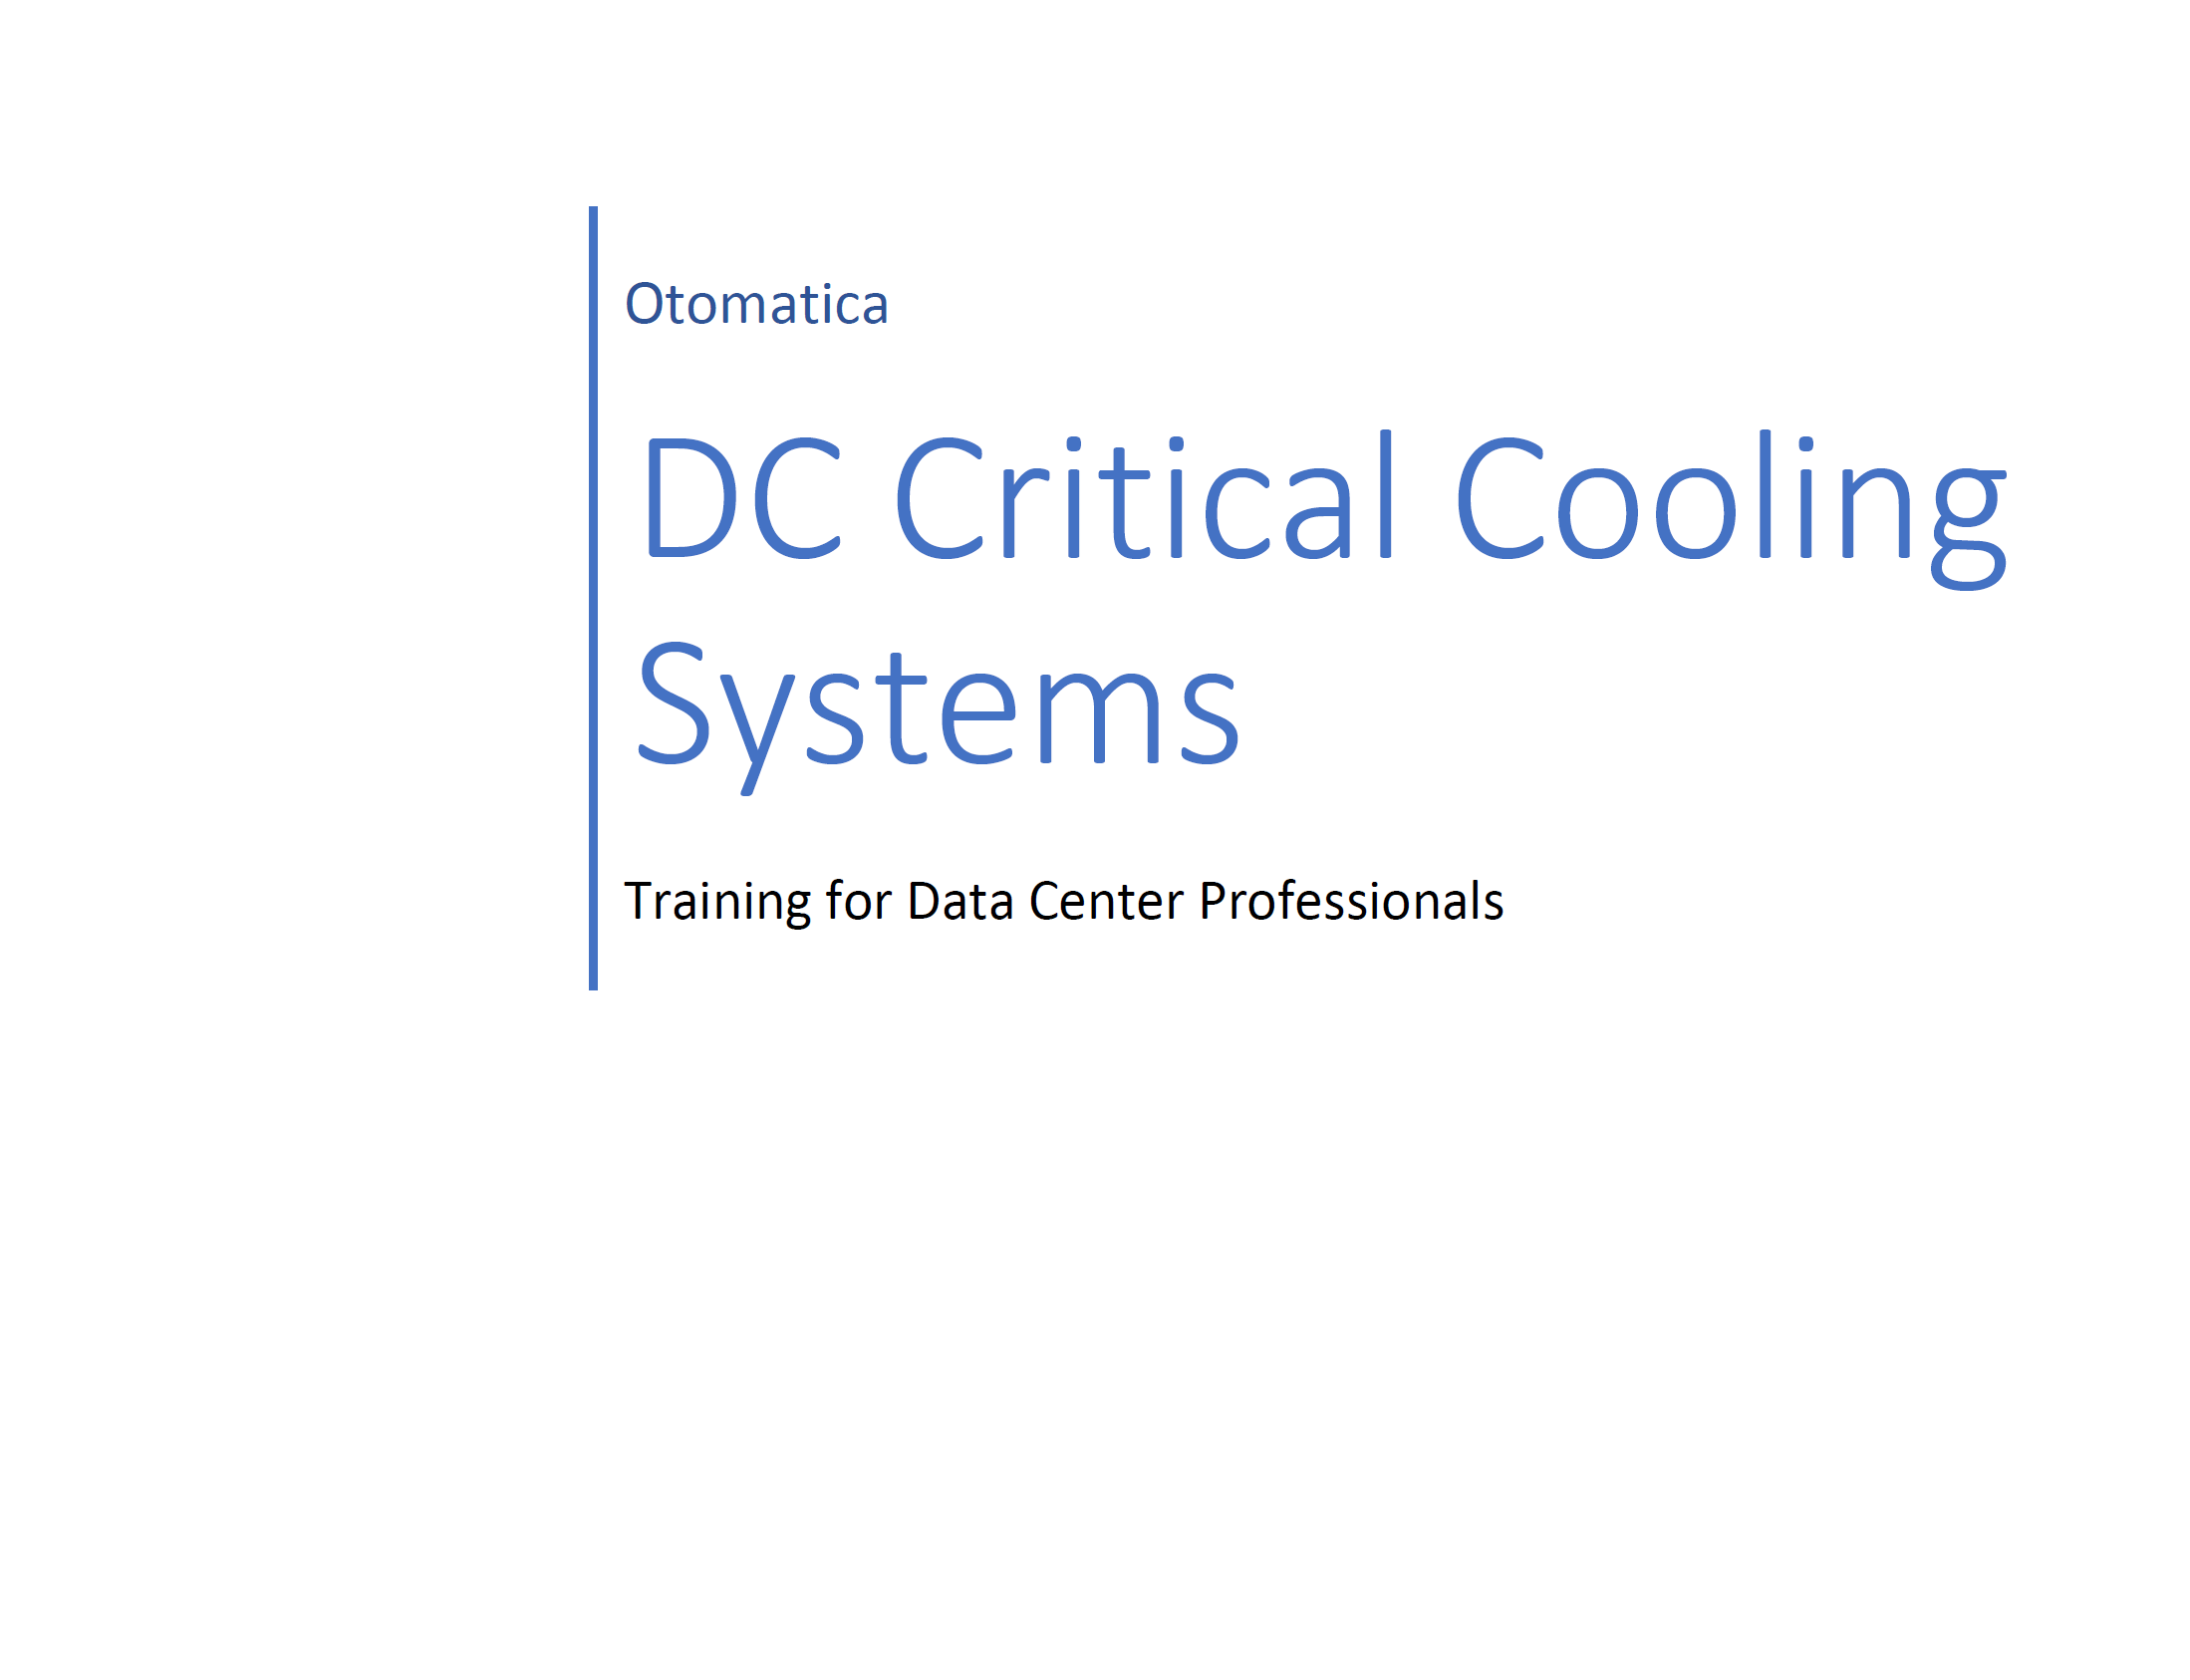 https://otomatica.com/wp-content/uploads/2022/03/DC-Critical-Cooling.png